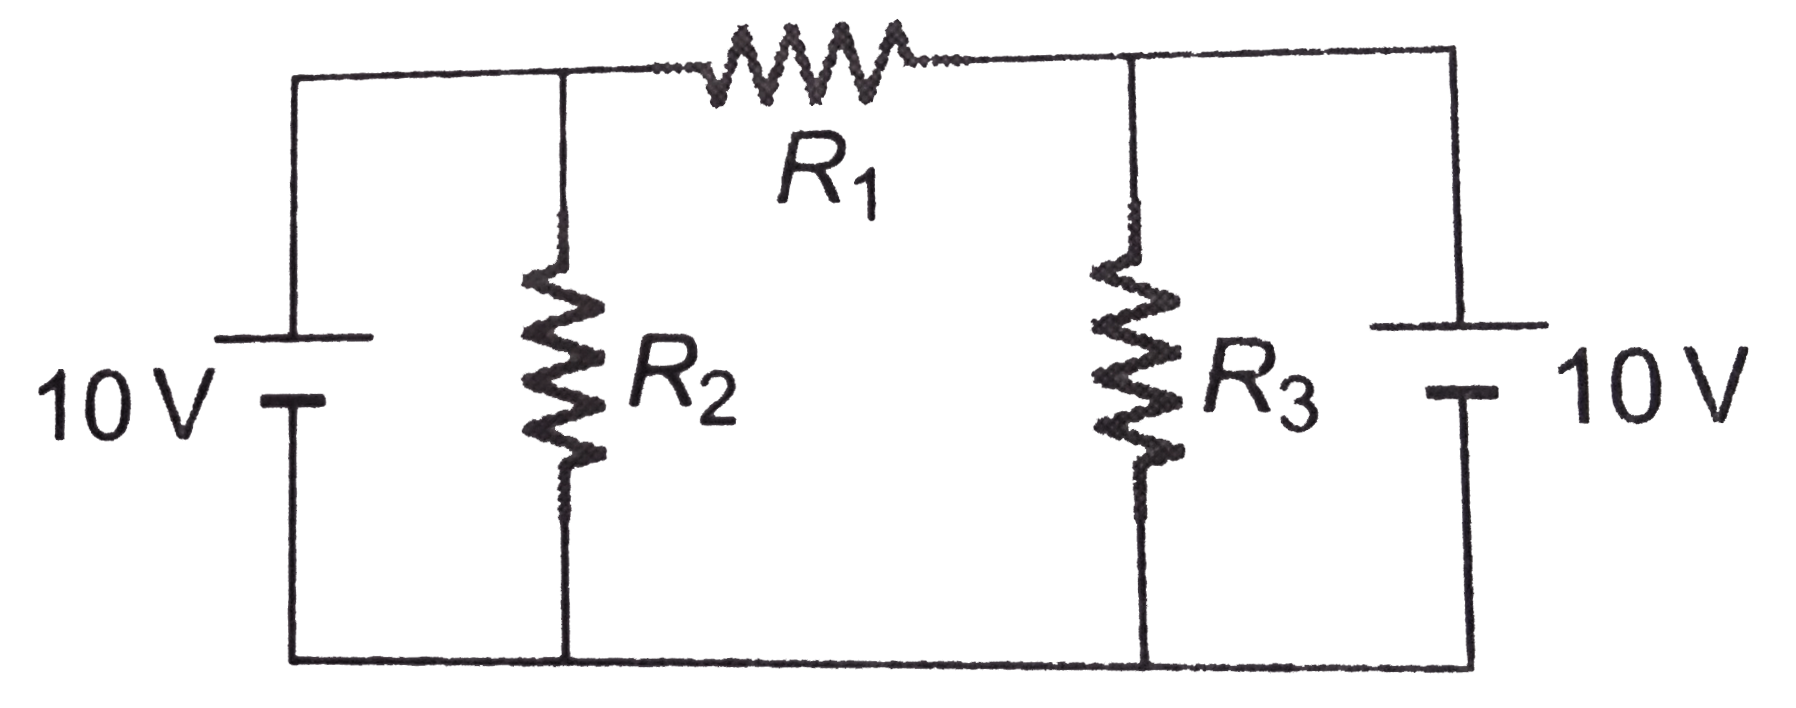 In the curcuit shown in figure R1=R2=R3=10Omega. Find the currents through R1 and R2